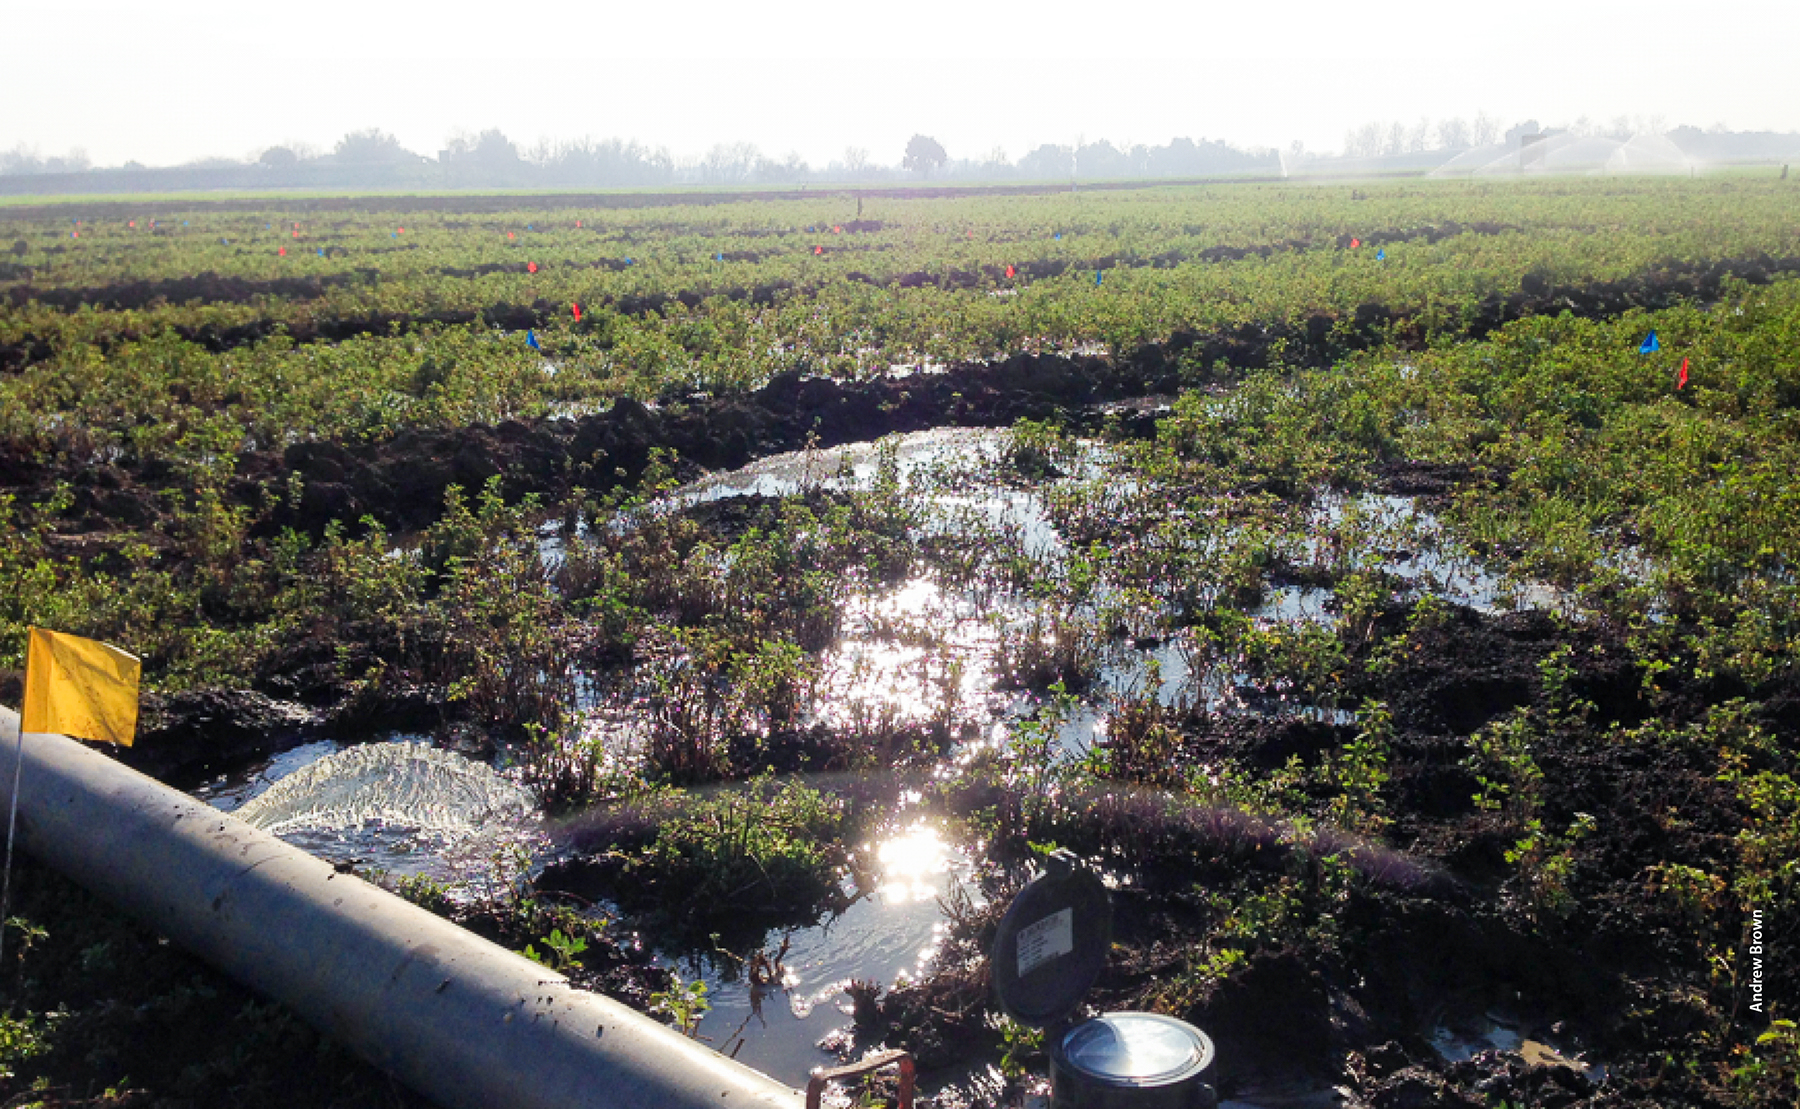 An experimental alfalfa plot at the UC Davis Plant Sciences Field Facility is flooded to evaluate crop impacts and groundwater recharge potential. The majority of alfalfa acreage in California is watered with flood irrigation systems capable of conveying large amounts of surface water to fields, many of which likely also have soil and underlying aquifer conditions suitable for recharge.